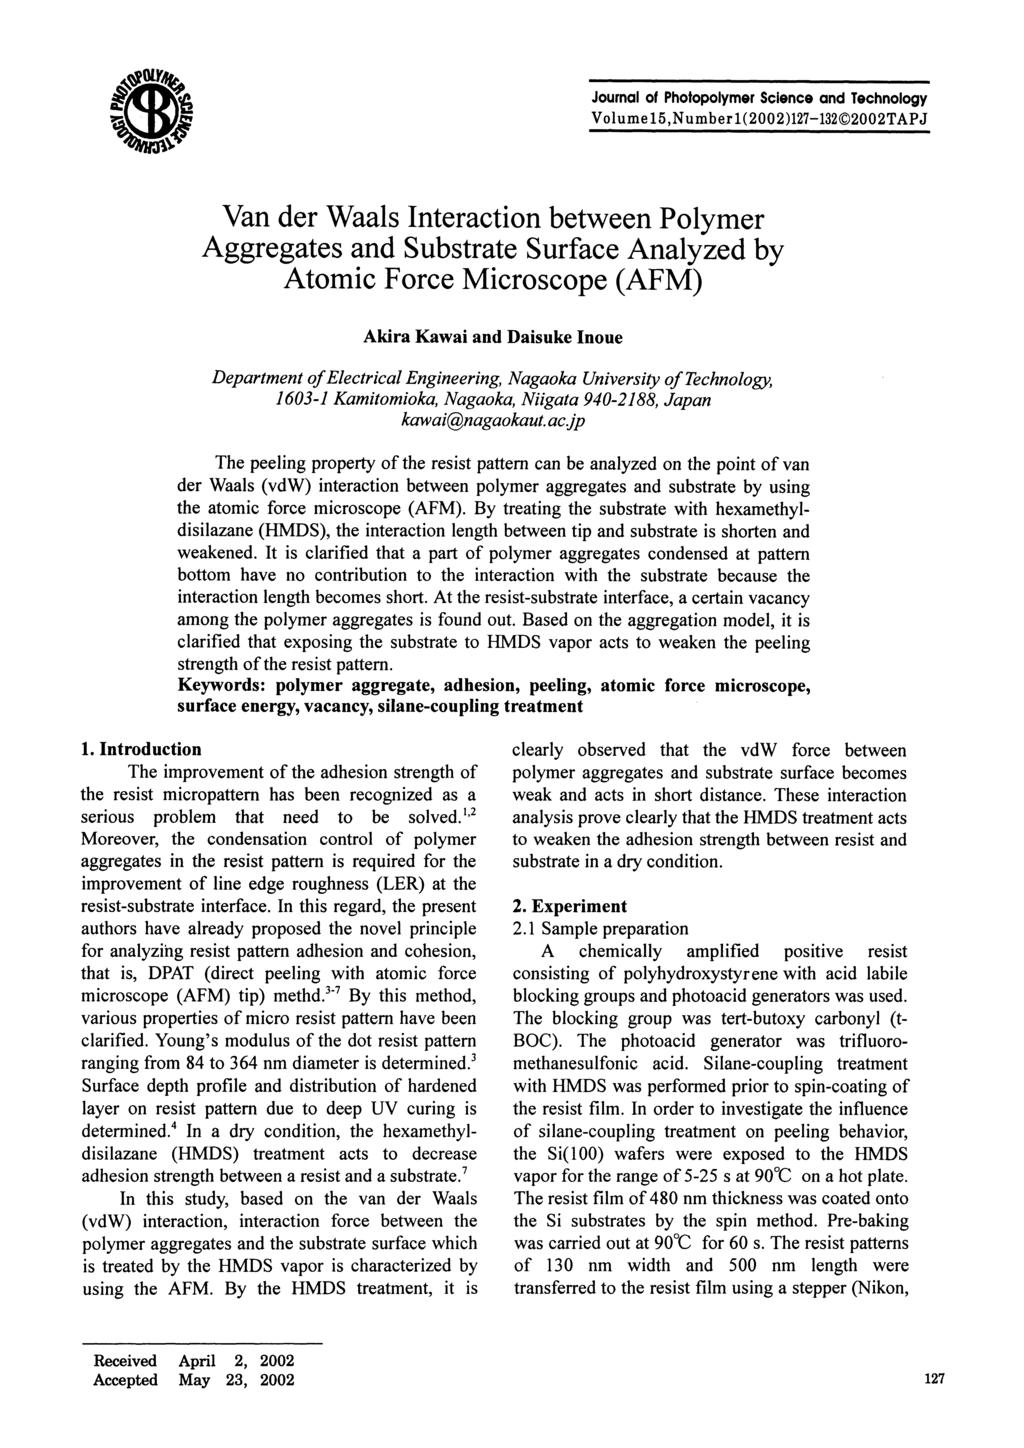 Journal of Photopolymer Science and Technology Volume 15,Number 1(2002)127-132 2002TAPJ L Van der Waals Interaction between Polymer Aggregates and Substrate Surface Analyzed by Atomic Force